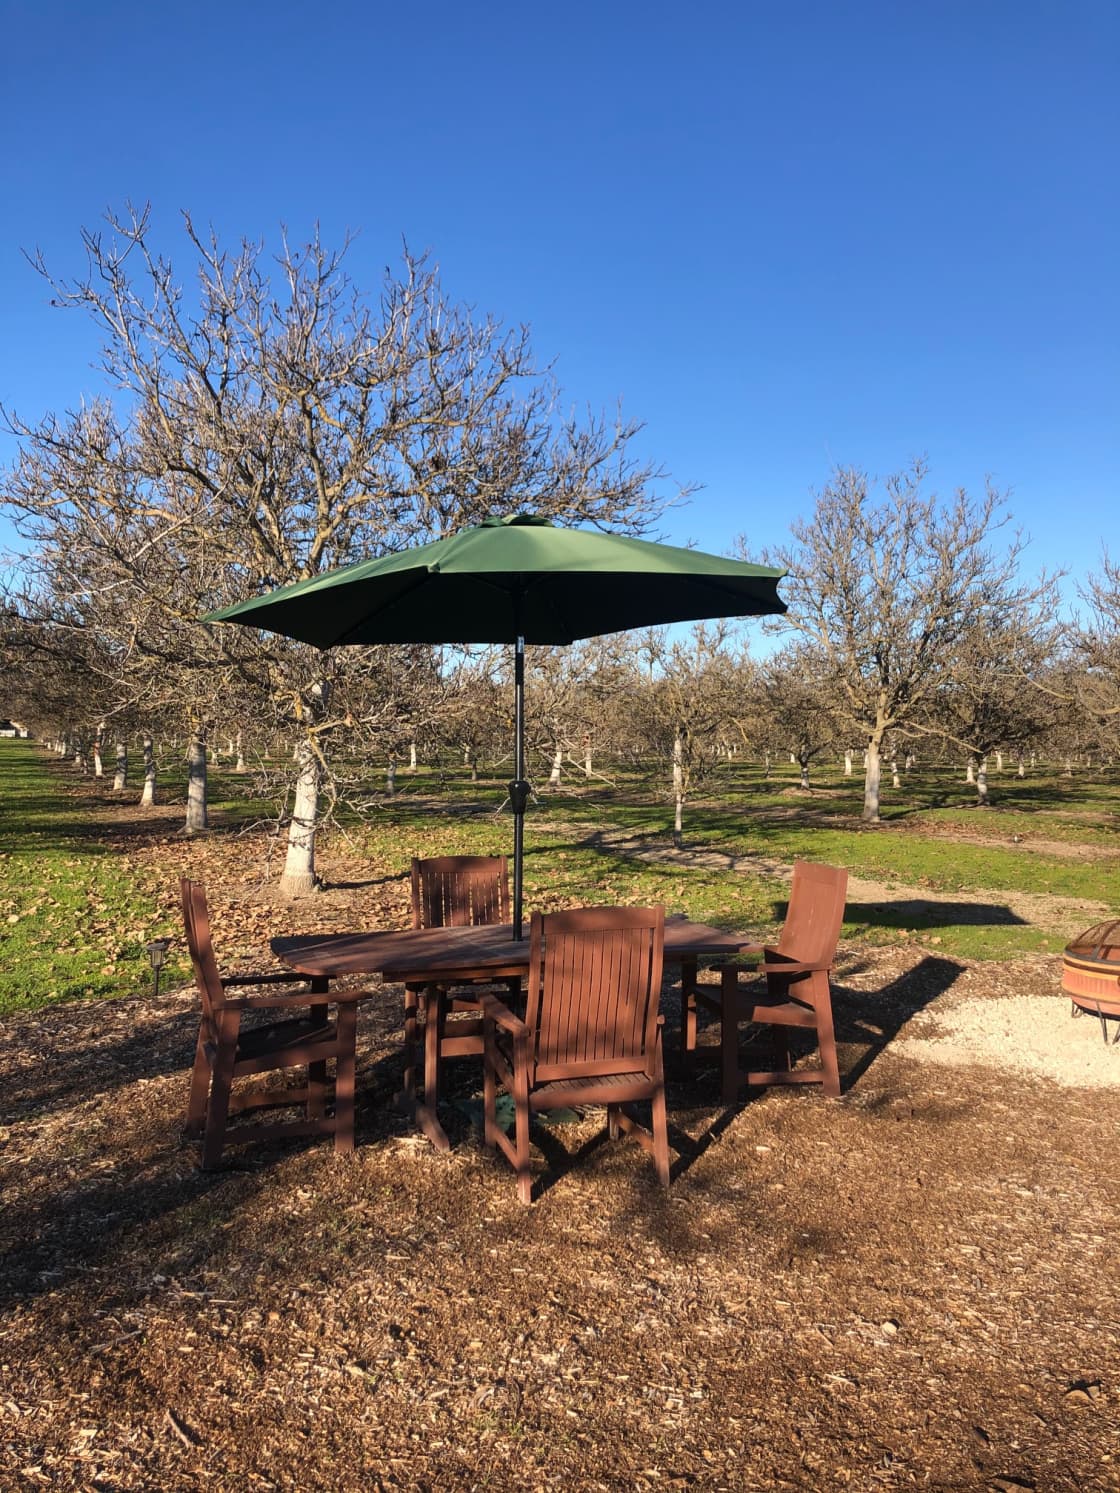 Nature is calling you  ... our orchard floor has a lovely green carpet right now and even without leaves the grove is peaceful and beautiful ... and just waiting for you. 